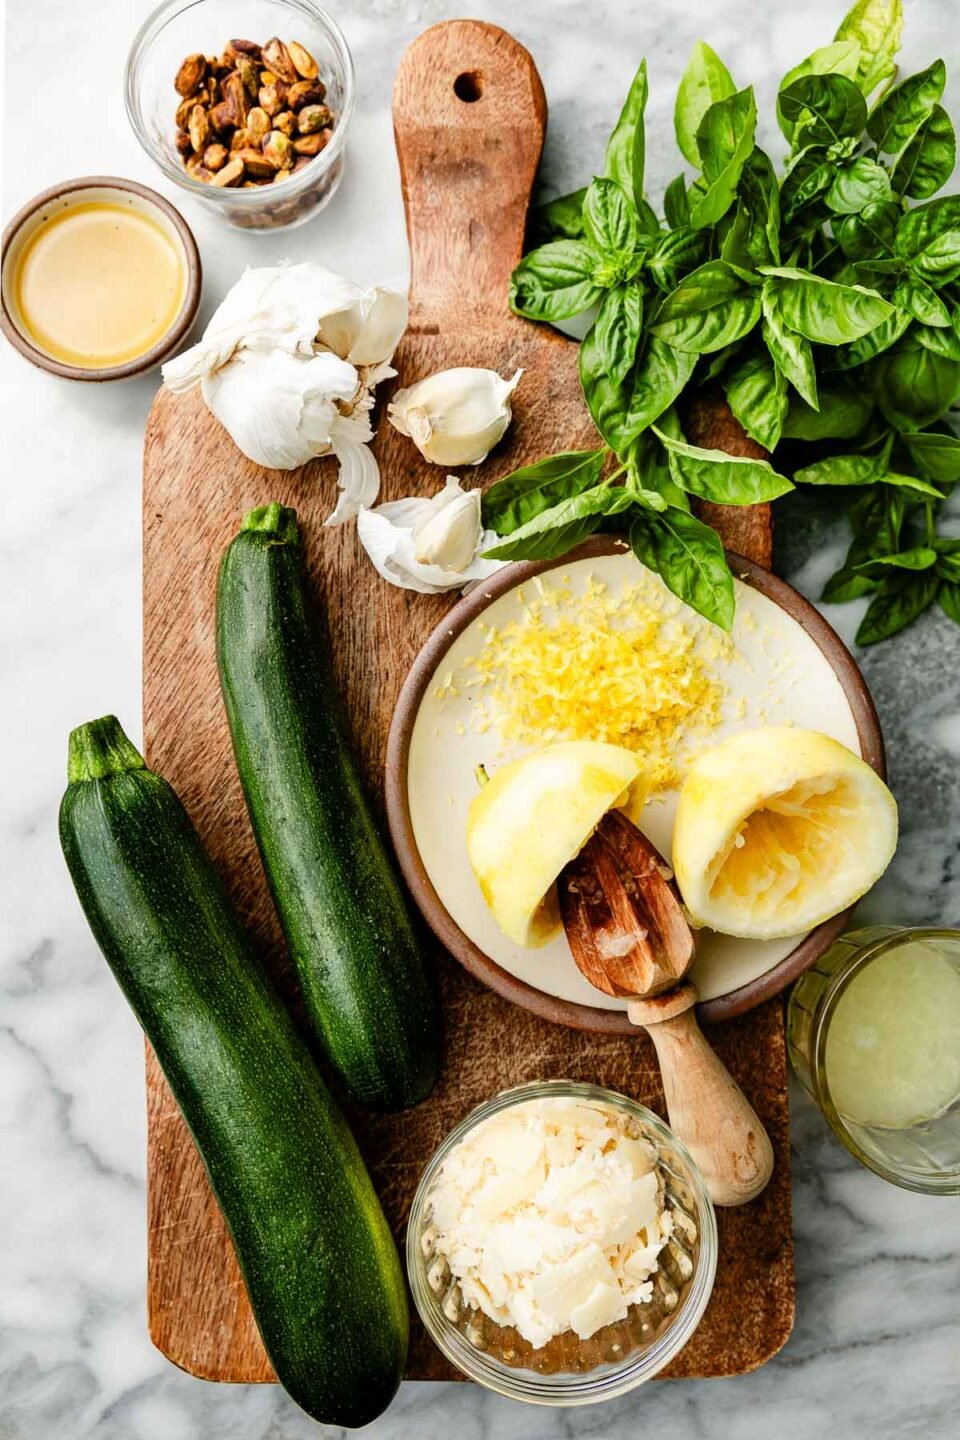 Ingredients displayed on a wooden cutting board and white marbled surface: Zucchini, lemons, basil, parmesan, garlic, pistachios and olive oil.